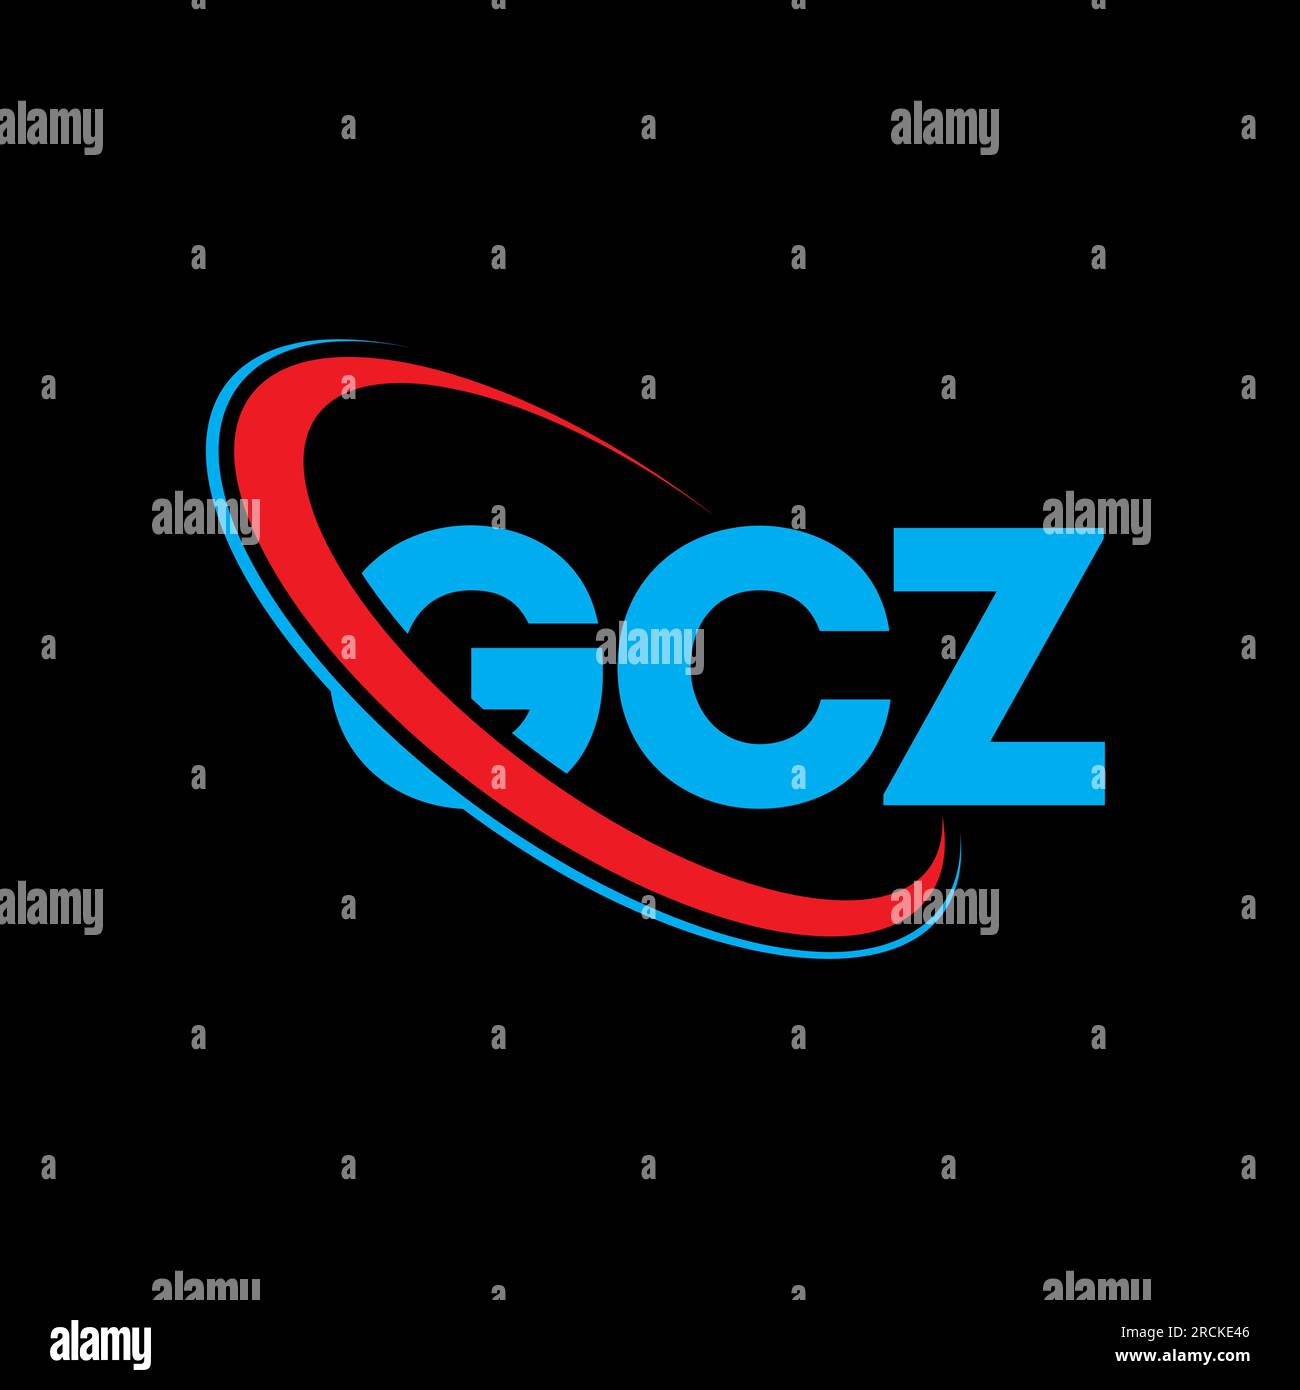 GCZ logo. GCZ letter. GCZ letter logo design. Initials GCZ logo linked with circle and uppercase monogram logo. GCZ typography for technology, busines Stock Vector